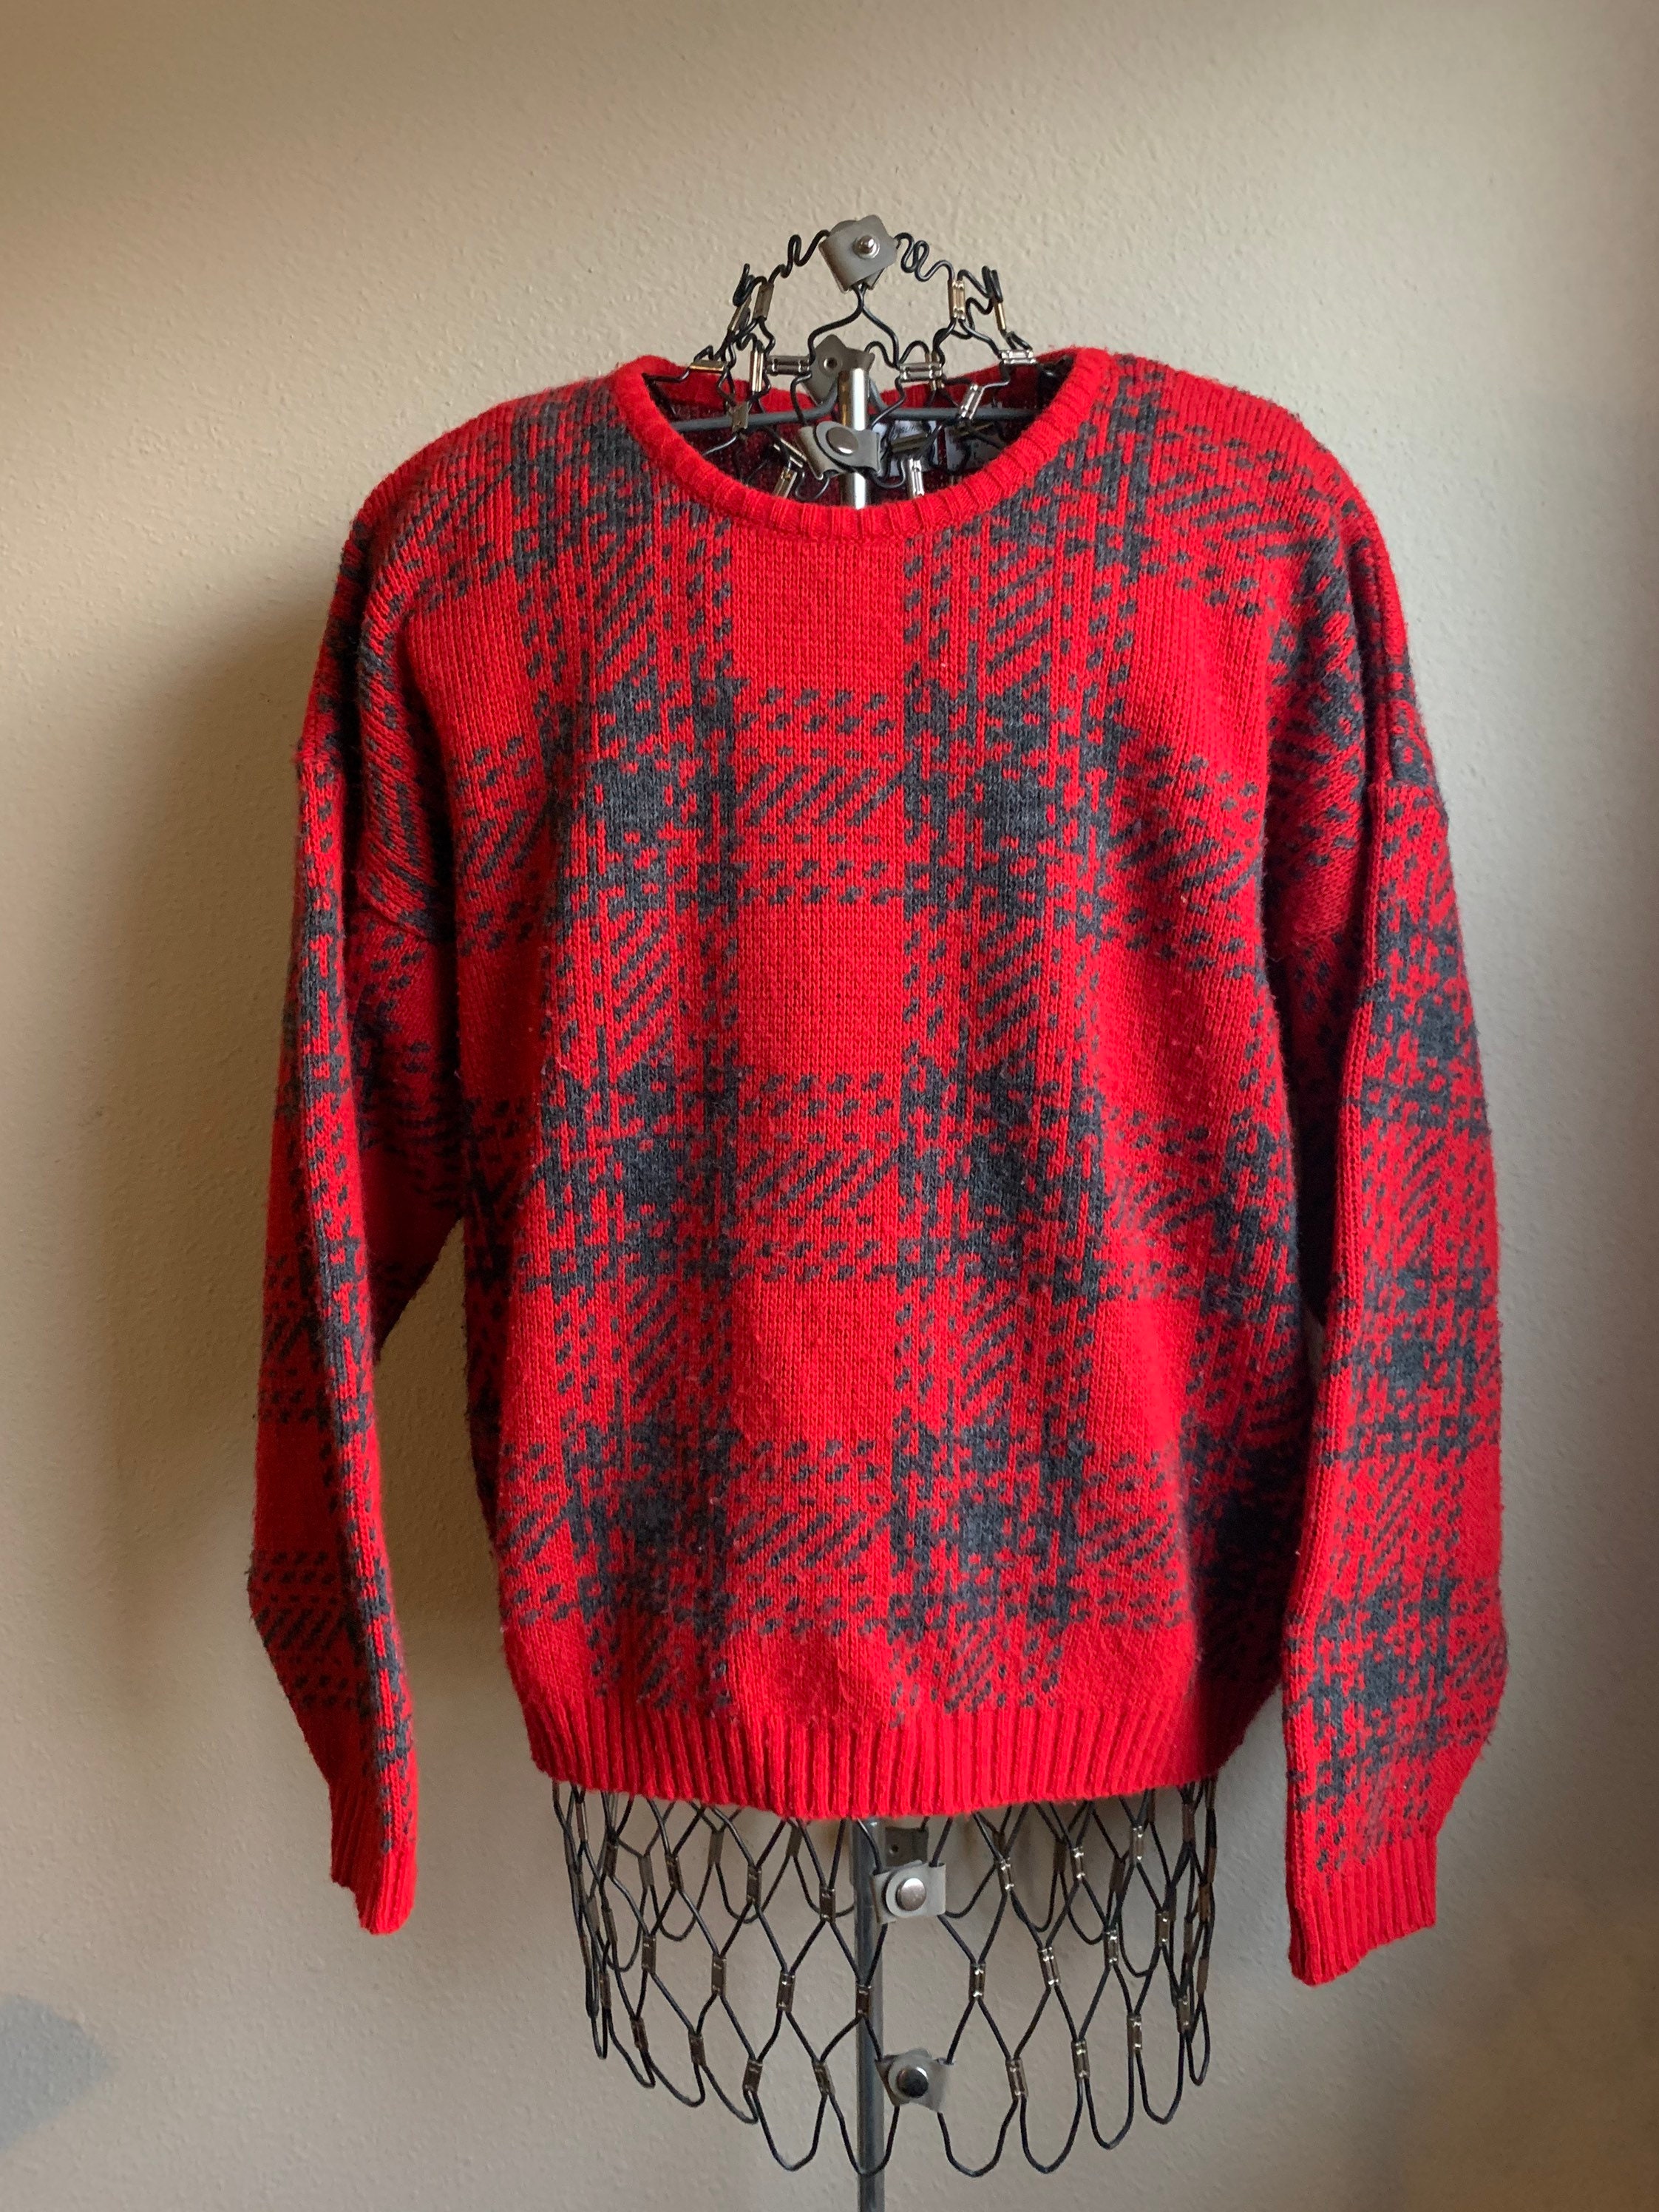 Vintage Maglificio Florence Wool Blend Red Green Pullover Sweater Women's Unisex Medium Large Made in Italy